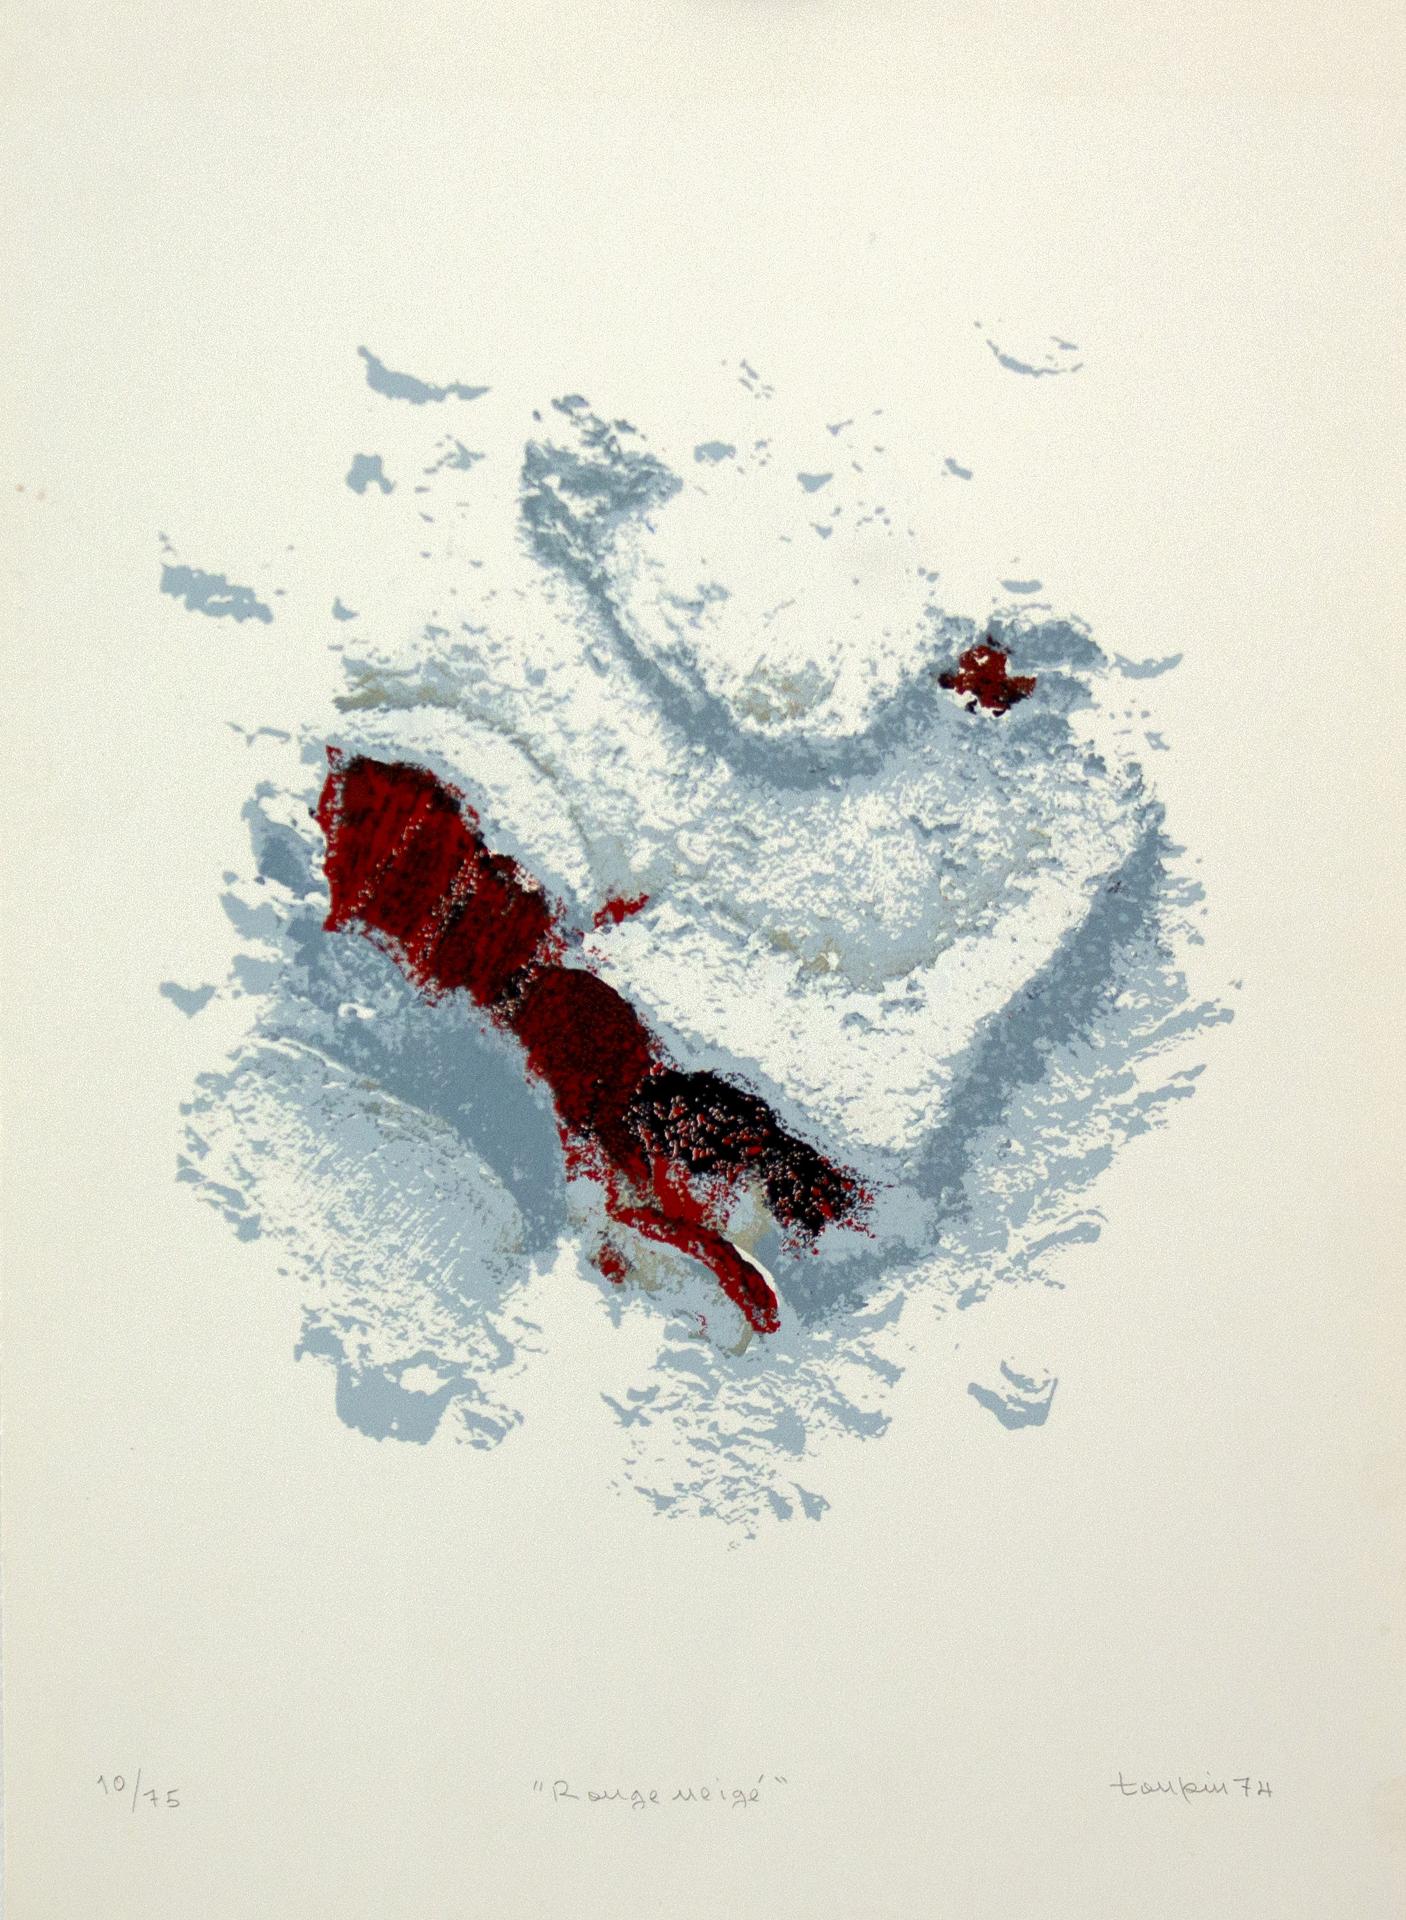 Fernand Toupin (1930-2009) - Rouge neigé, 1974